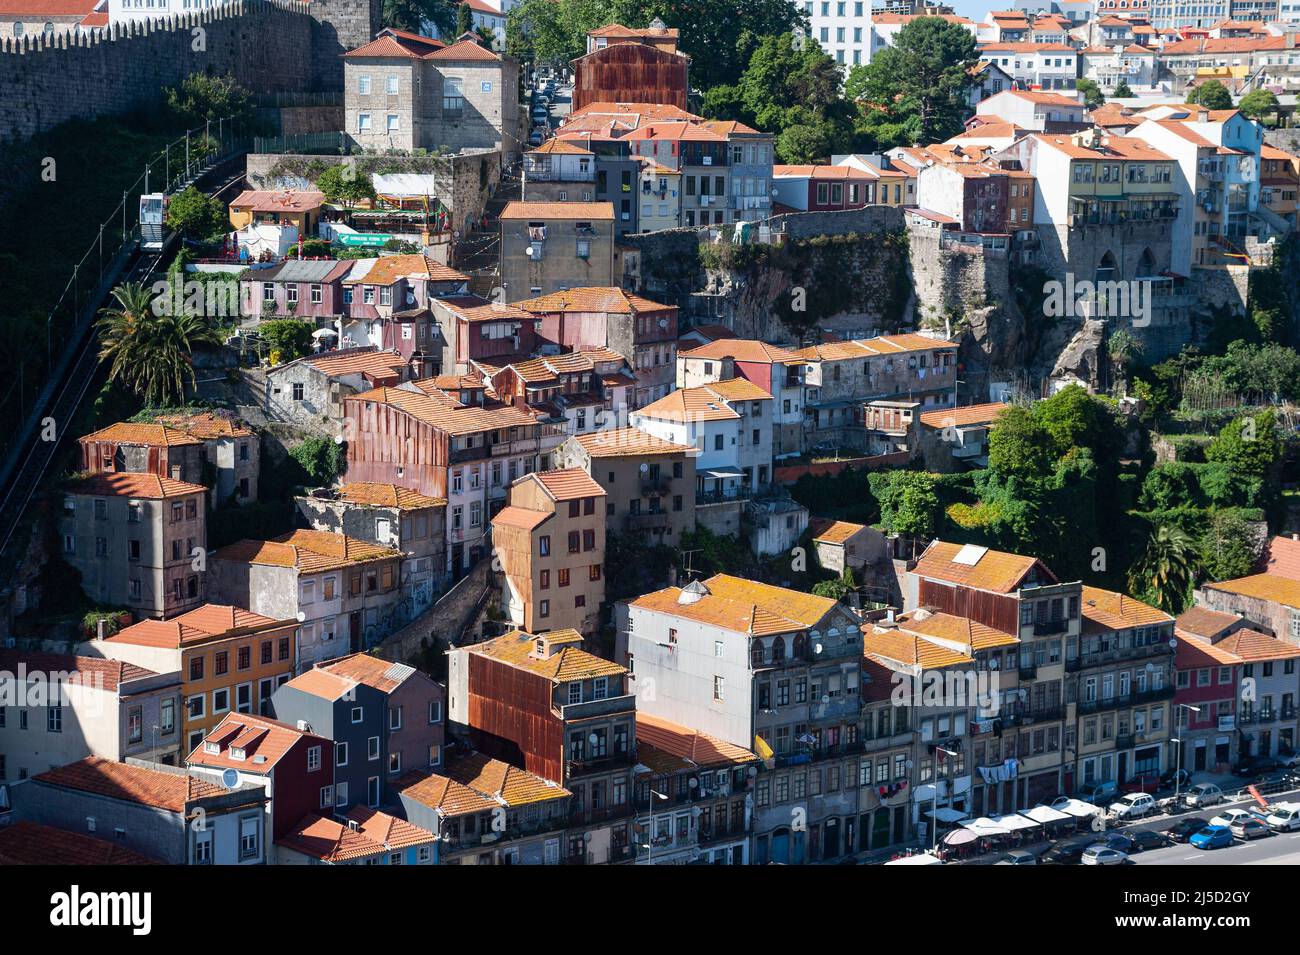 06/14/2018, Porto, Portugal, Europe - City view with the historic old town Ribeira and traditional buildings on the hillside along the waterfront of the Douro river. [automated translation] Stock Photo